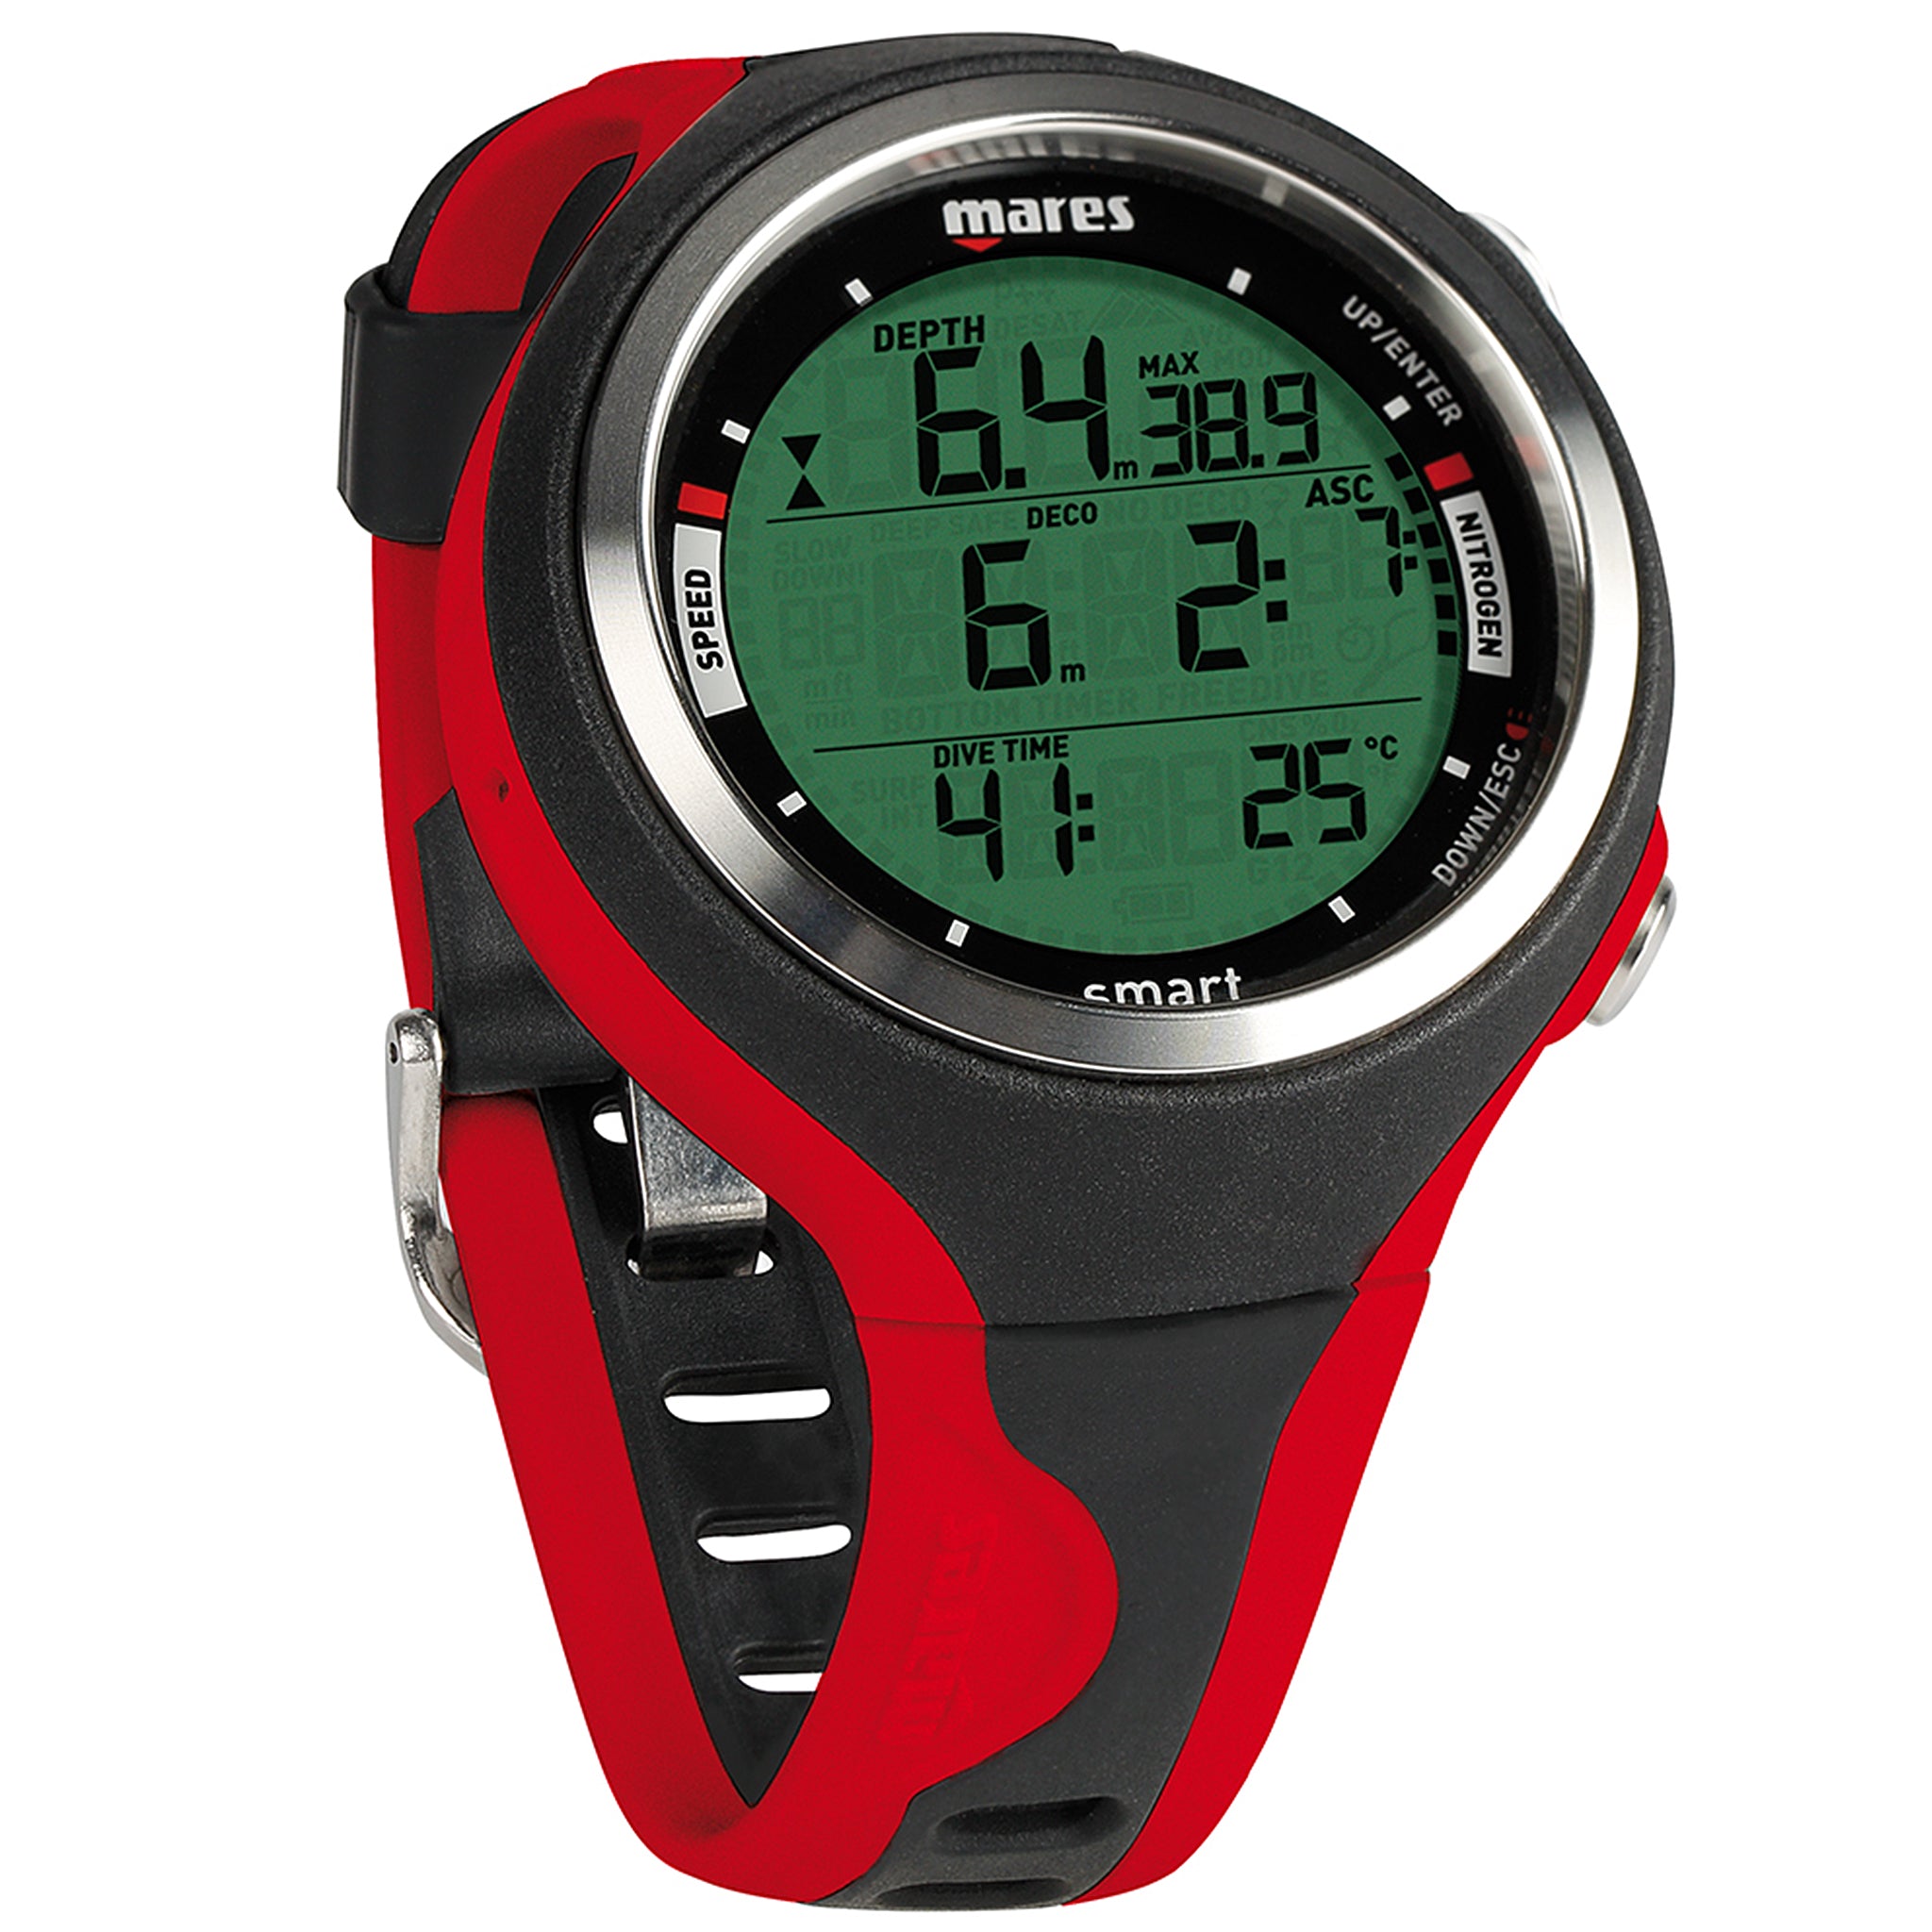 Mares Smart Dive Computer Red And Black, wrist computer